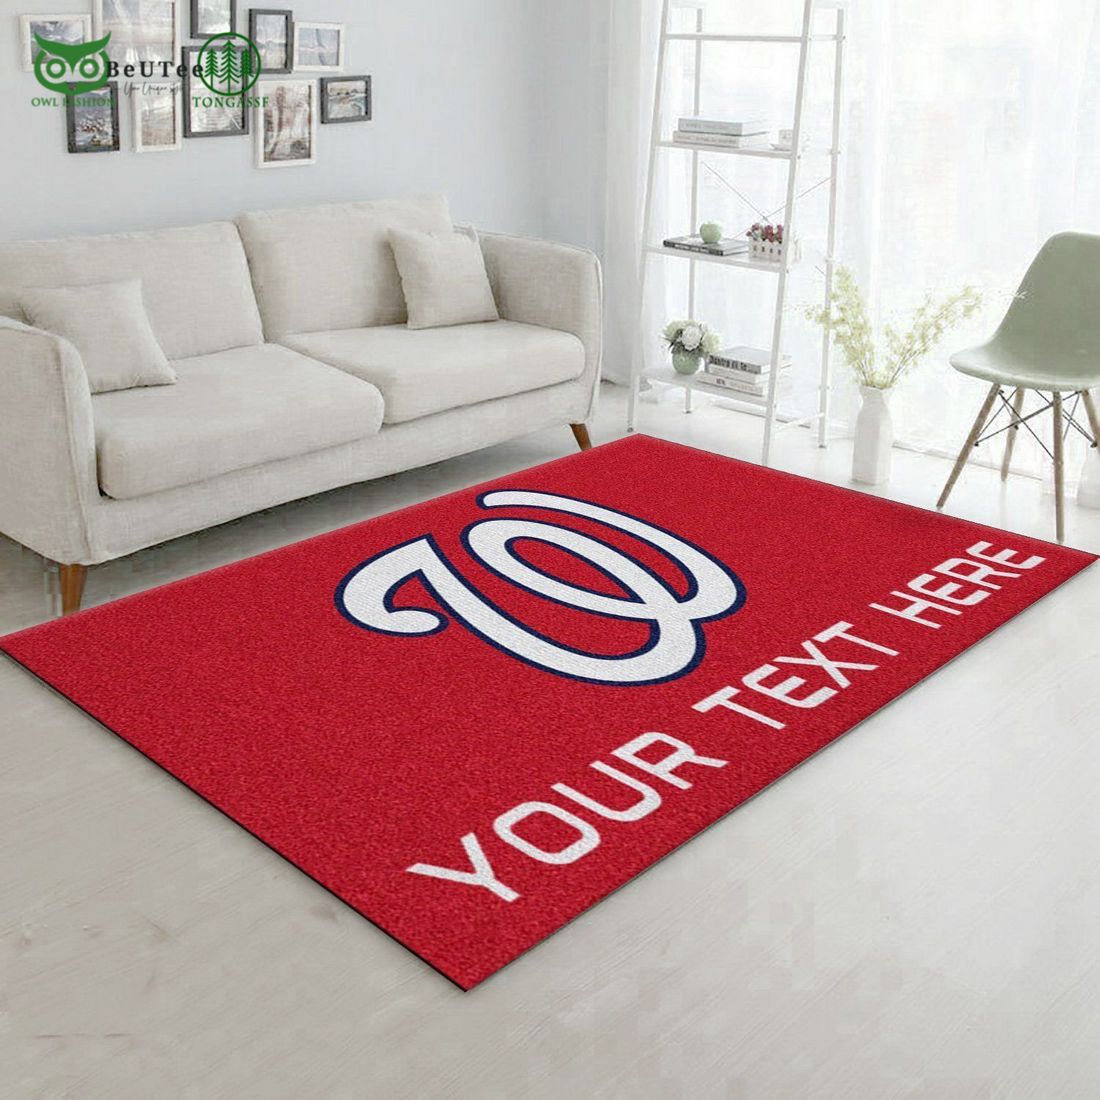 personalized accent mlb rug area red carpet rug 1 7YHiJ